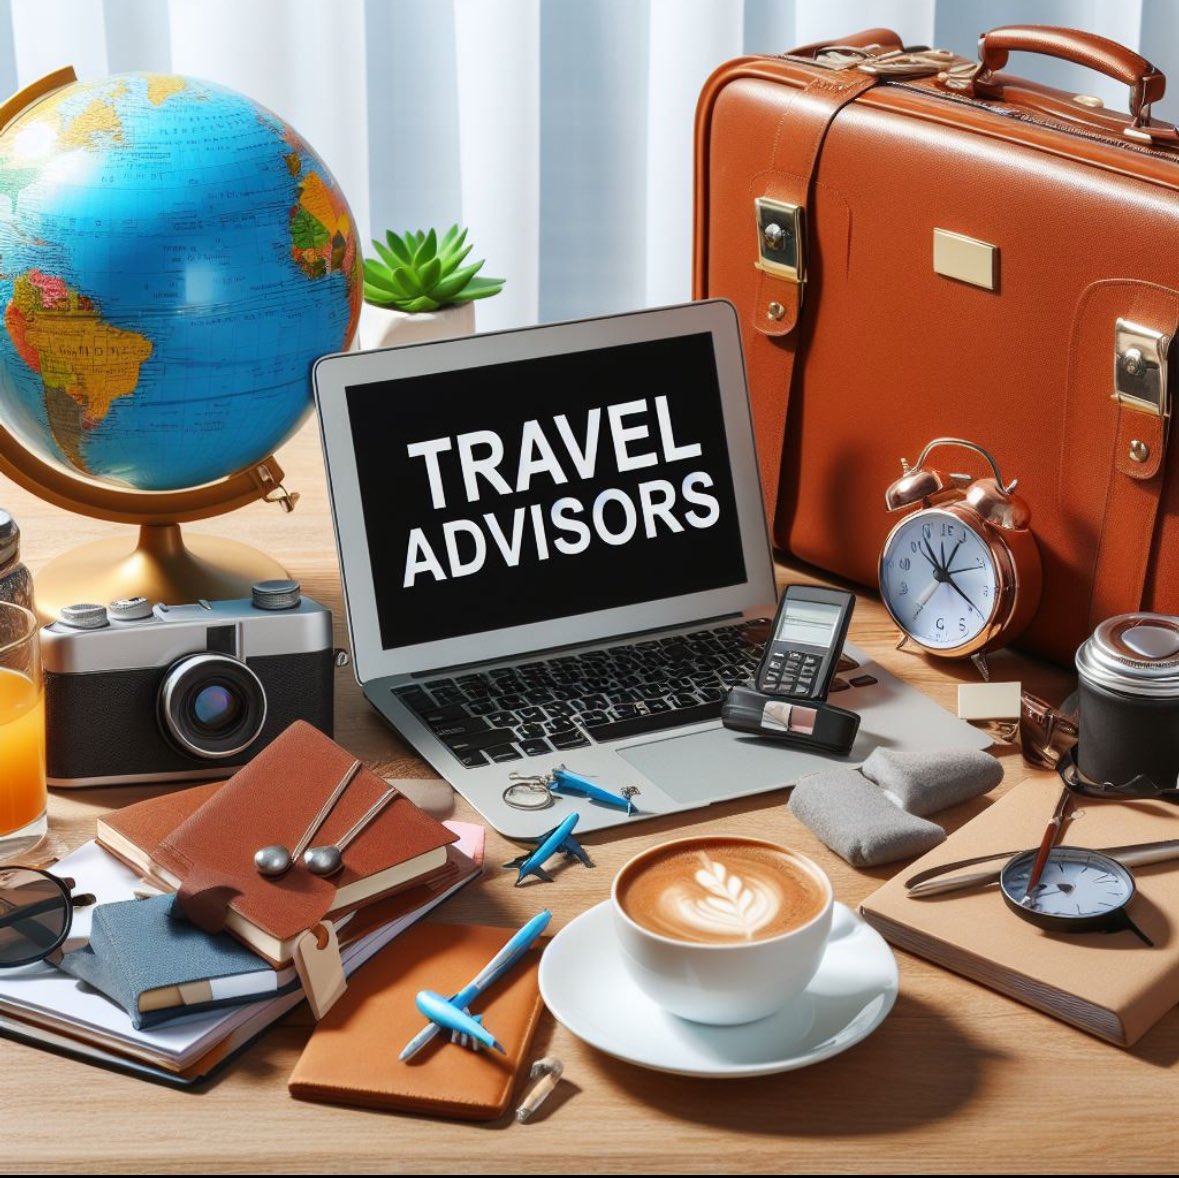 Don't miss out on valuable airline rewards for your business!

Utilize Concur Travel and Travel Advisors to maximize benefits. 

#CorporateTravel #ConcurTravel
#Businesstravel 
#Travel #Business